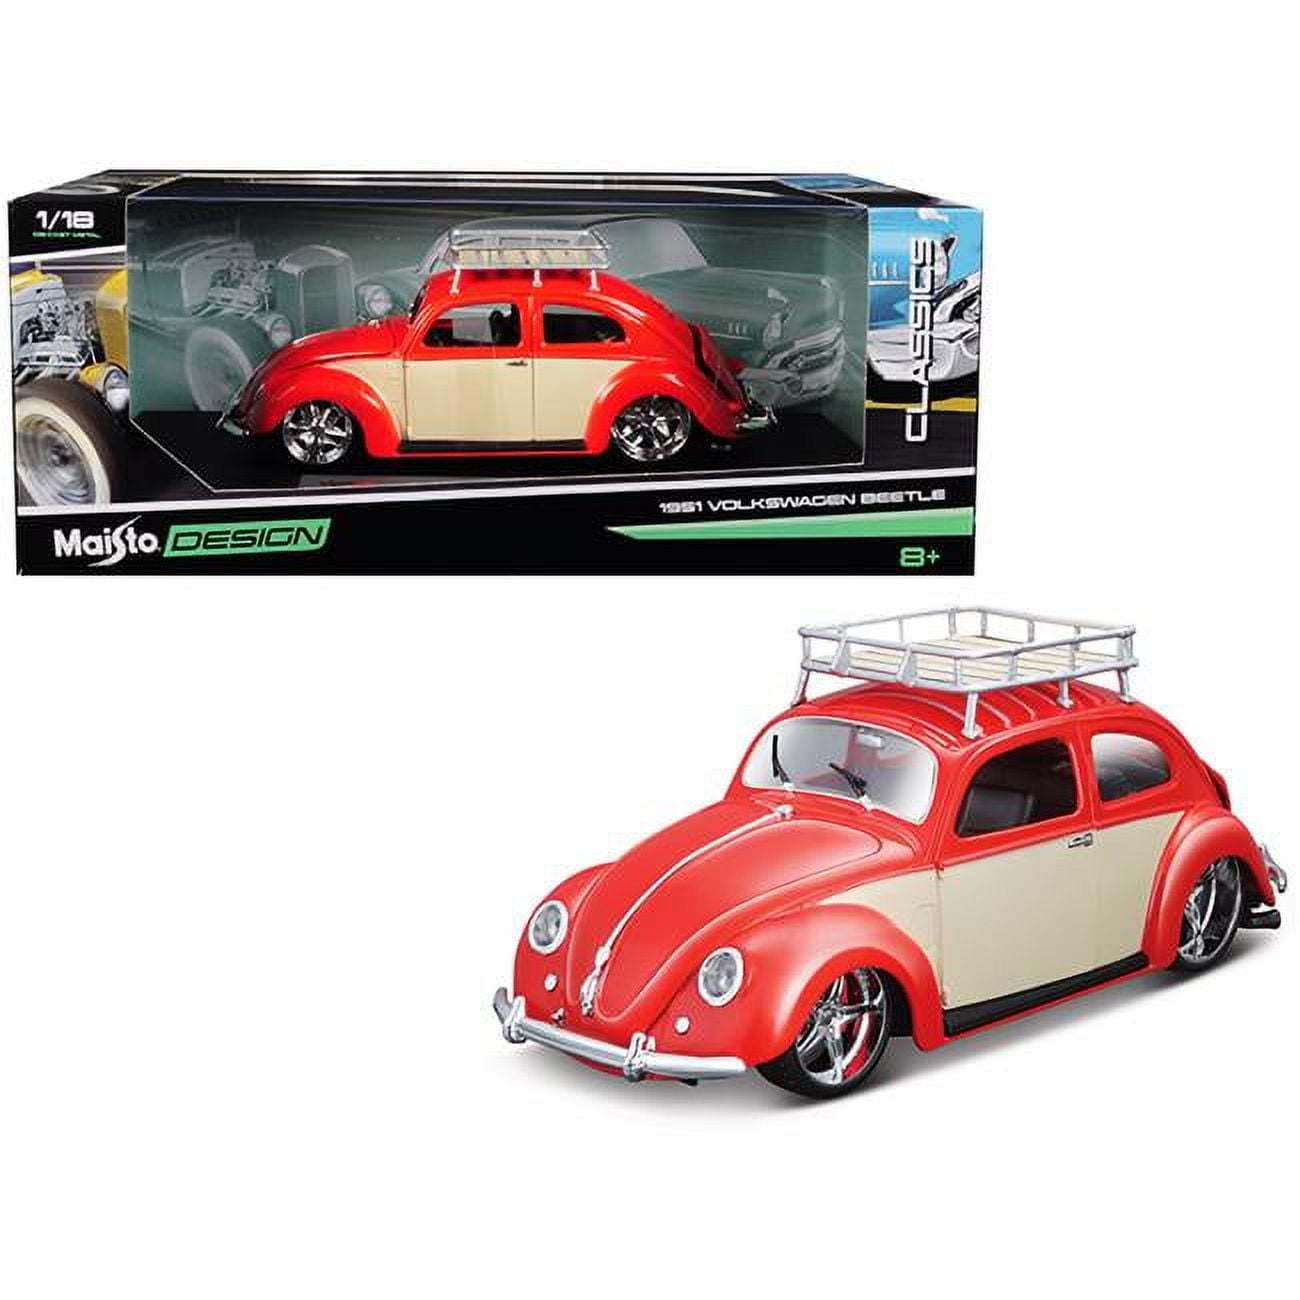 Maisto 32614r 1951 Volkswagen Beetle With Roof Rack Orange Red Classic Muscle 1-18 Diecast Model Car